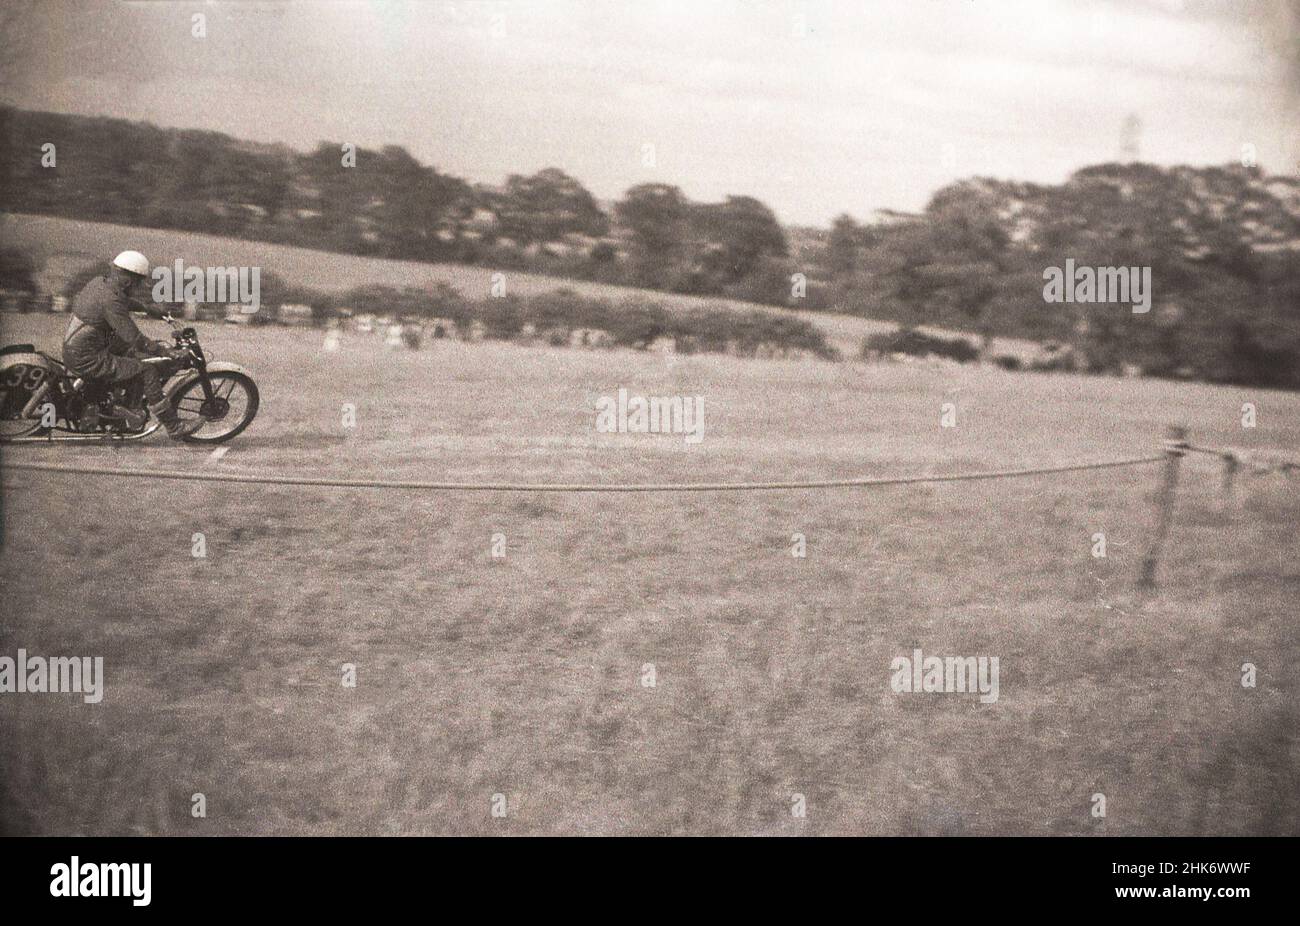 1950s, historical, scrambling, a male rider on his motorcycle racing across a hillside field, England, UK. Started in Camberley, Surrey, England in the 1920s, the bikes used orginally in the cross-country racing were ordinary roadbikes with little suspension. Stock Photo